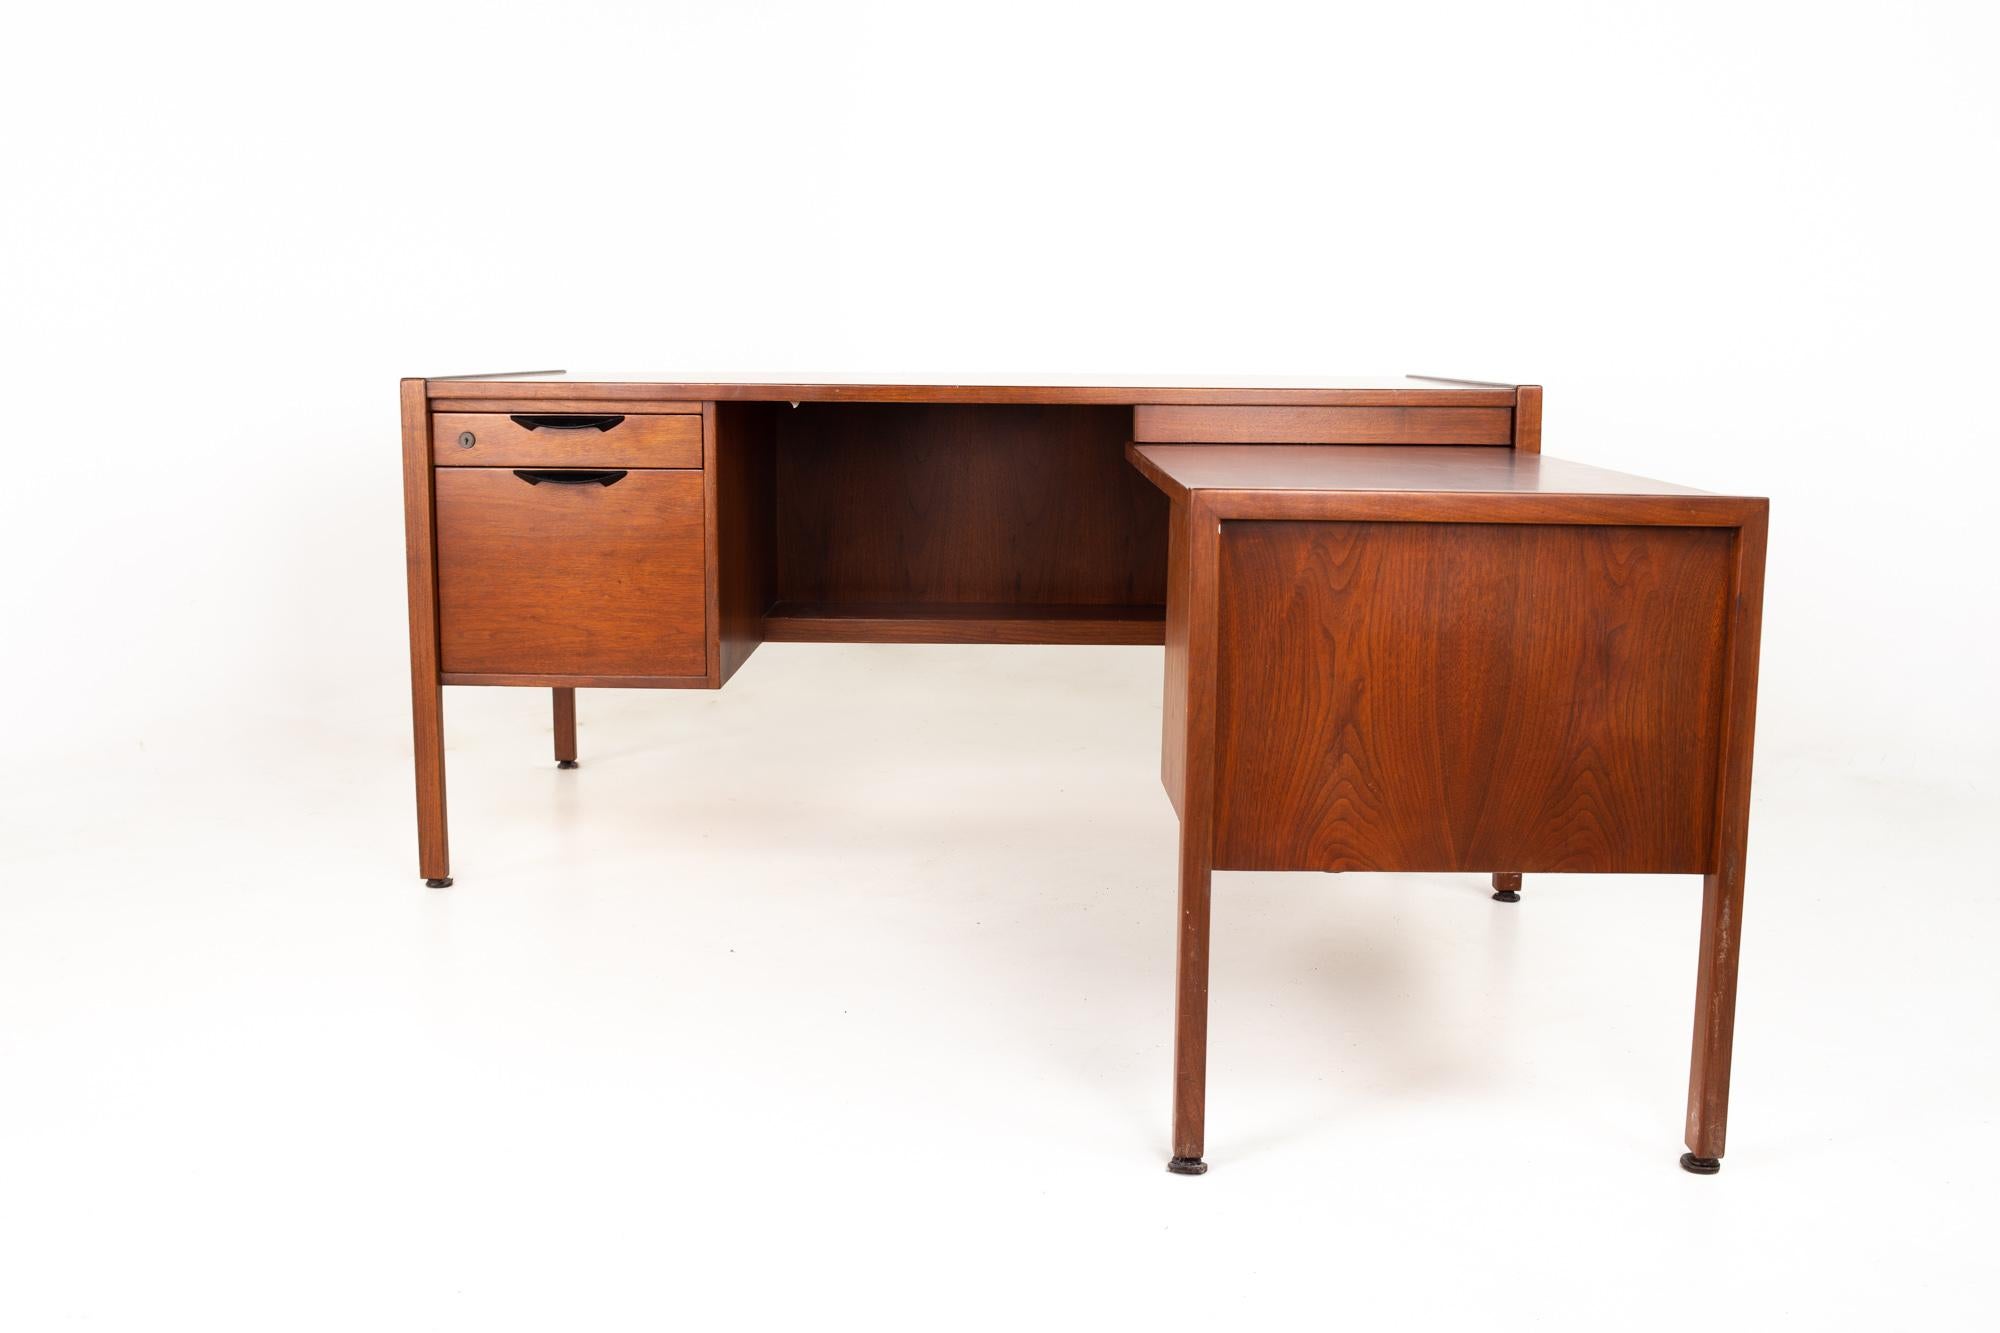 Jens Risom Mid Century walnut executive desk.
Desk measures: 62 wide x 34.75 deep x 28.75 inches high

All pieces of furniture can be had in what we call restored vintage condition. That means the piece is restored upon purchase so it’s free of